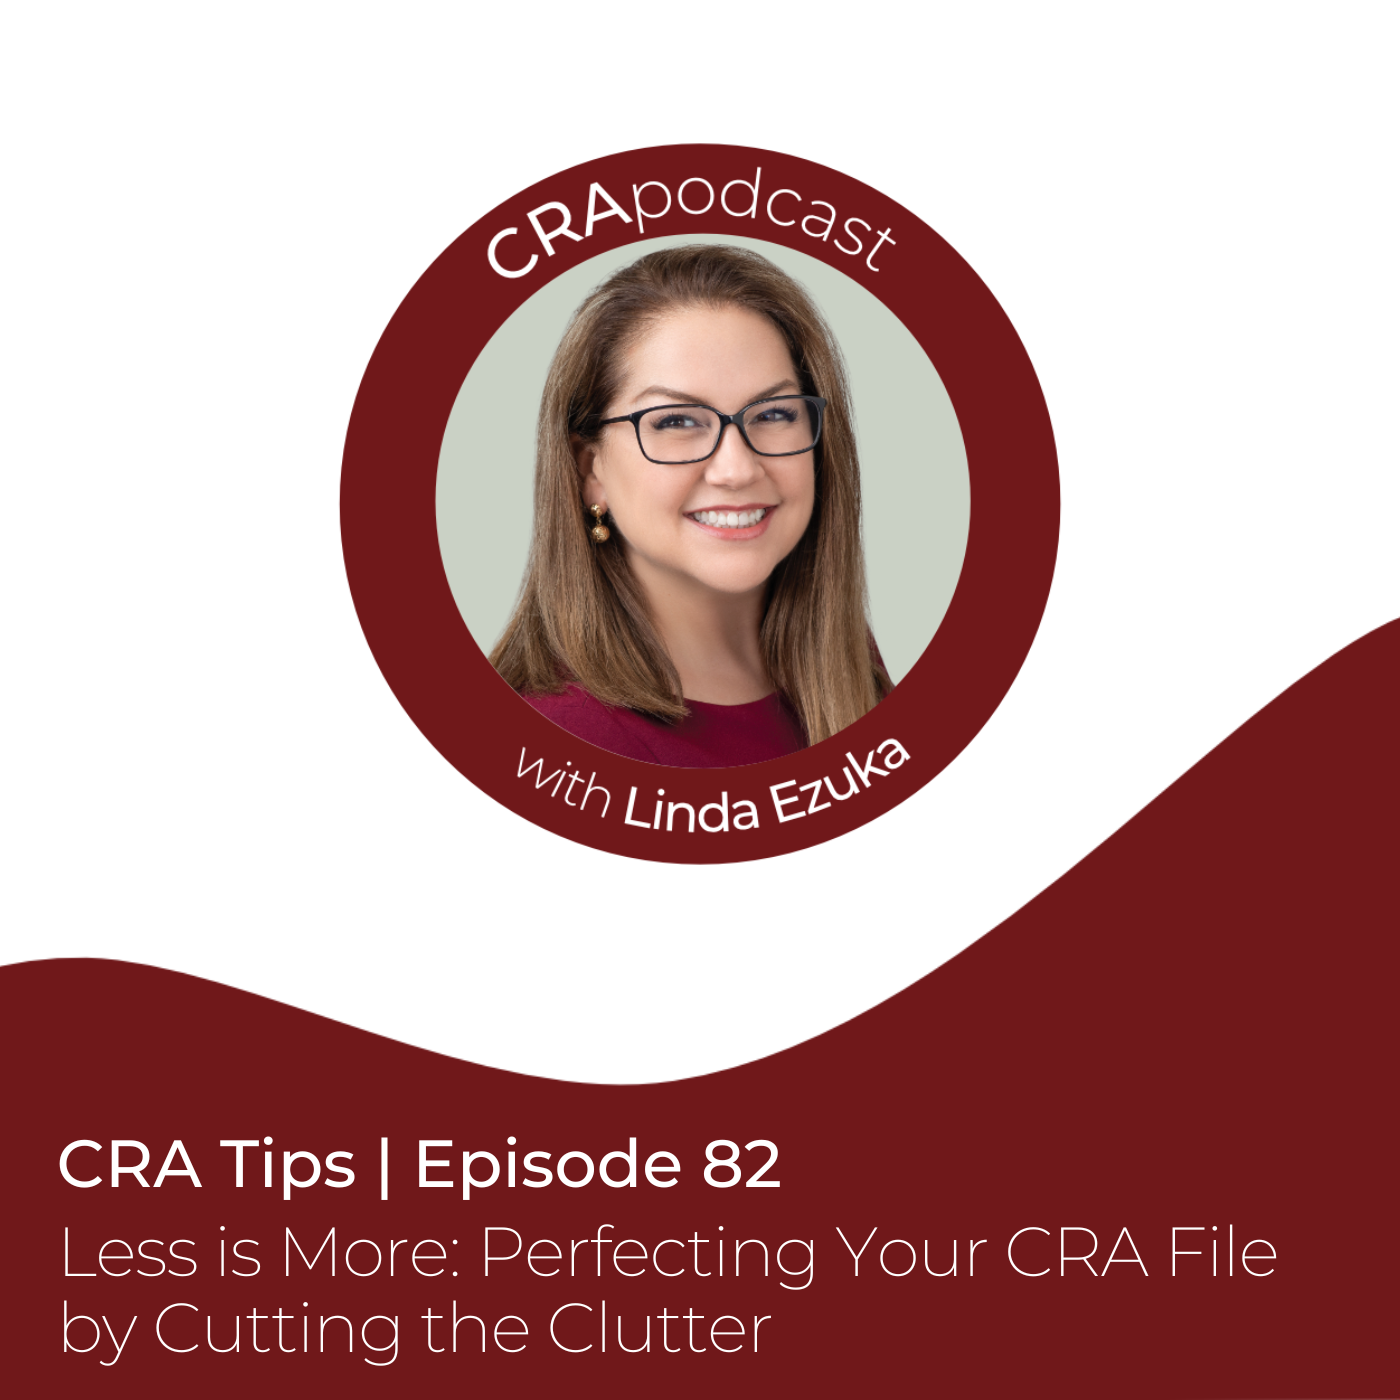 Episode 82: CRA Tips: Less is More – Perfecting Your CRA File by Cutting the Clutter